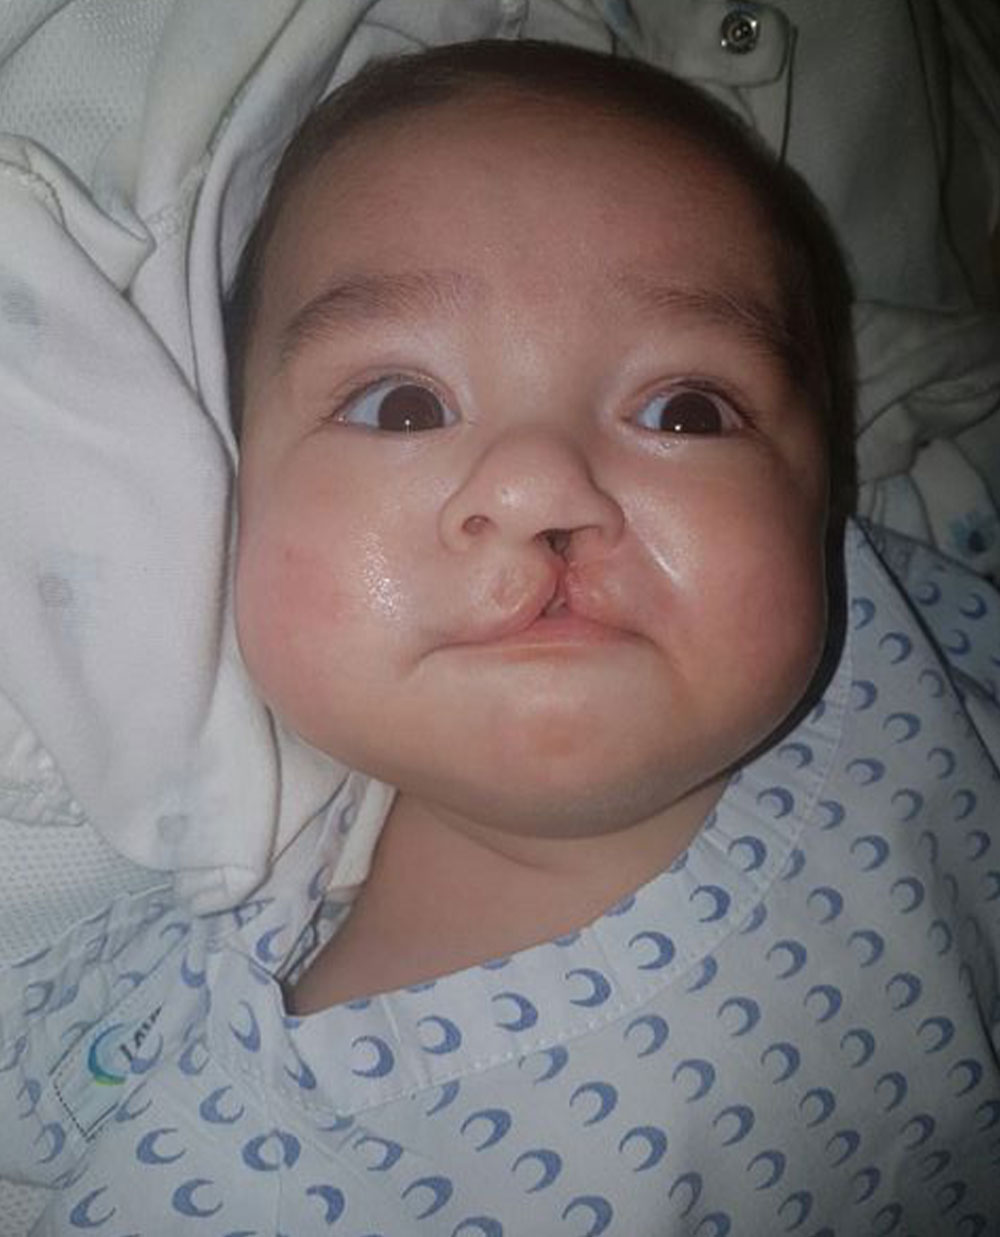 Baby Damián before cleft surgery